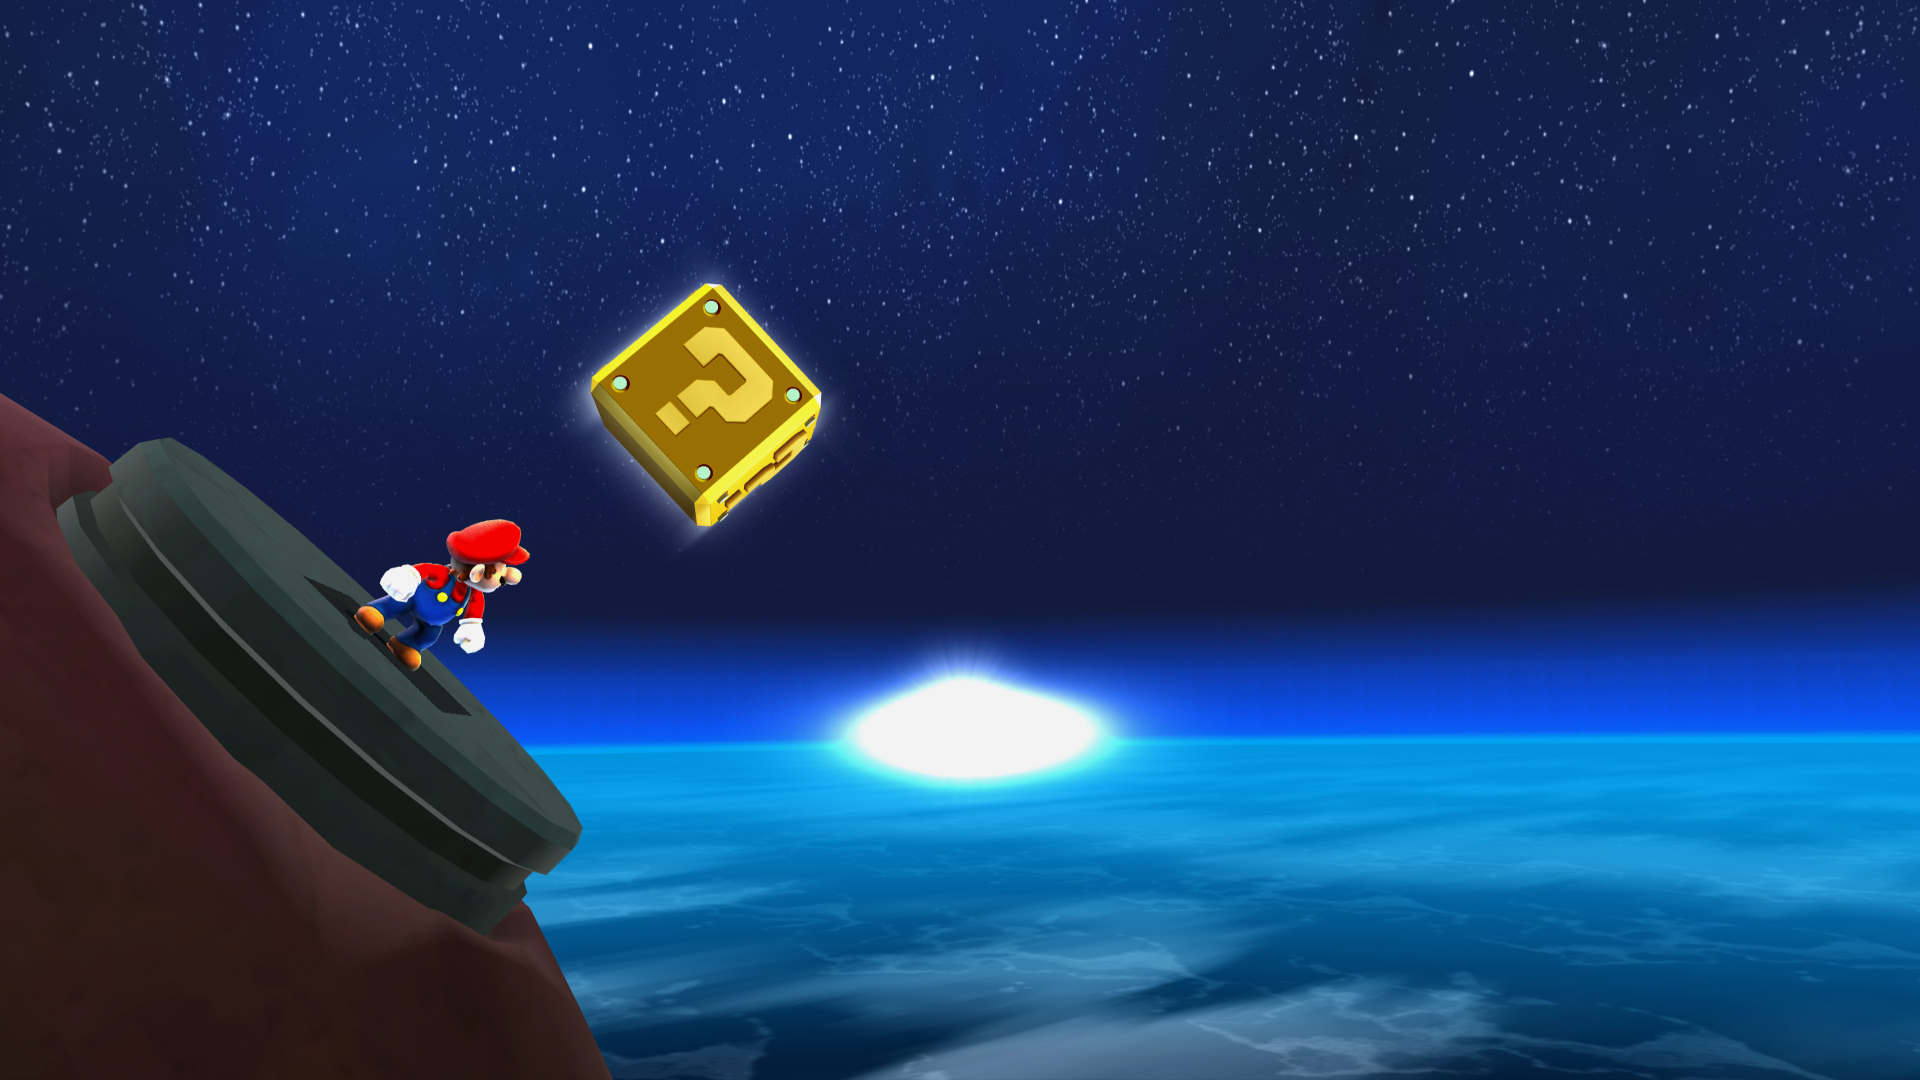 24 Super Mario Galaxy HD Wallpapers Backgrounds - Wallpaper Abyss